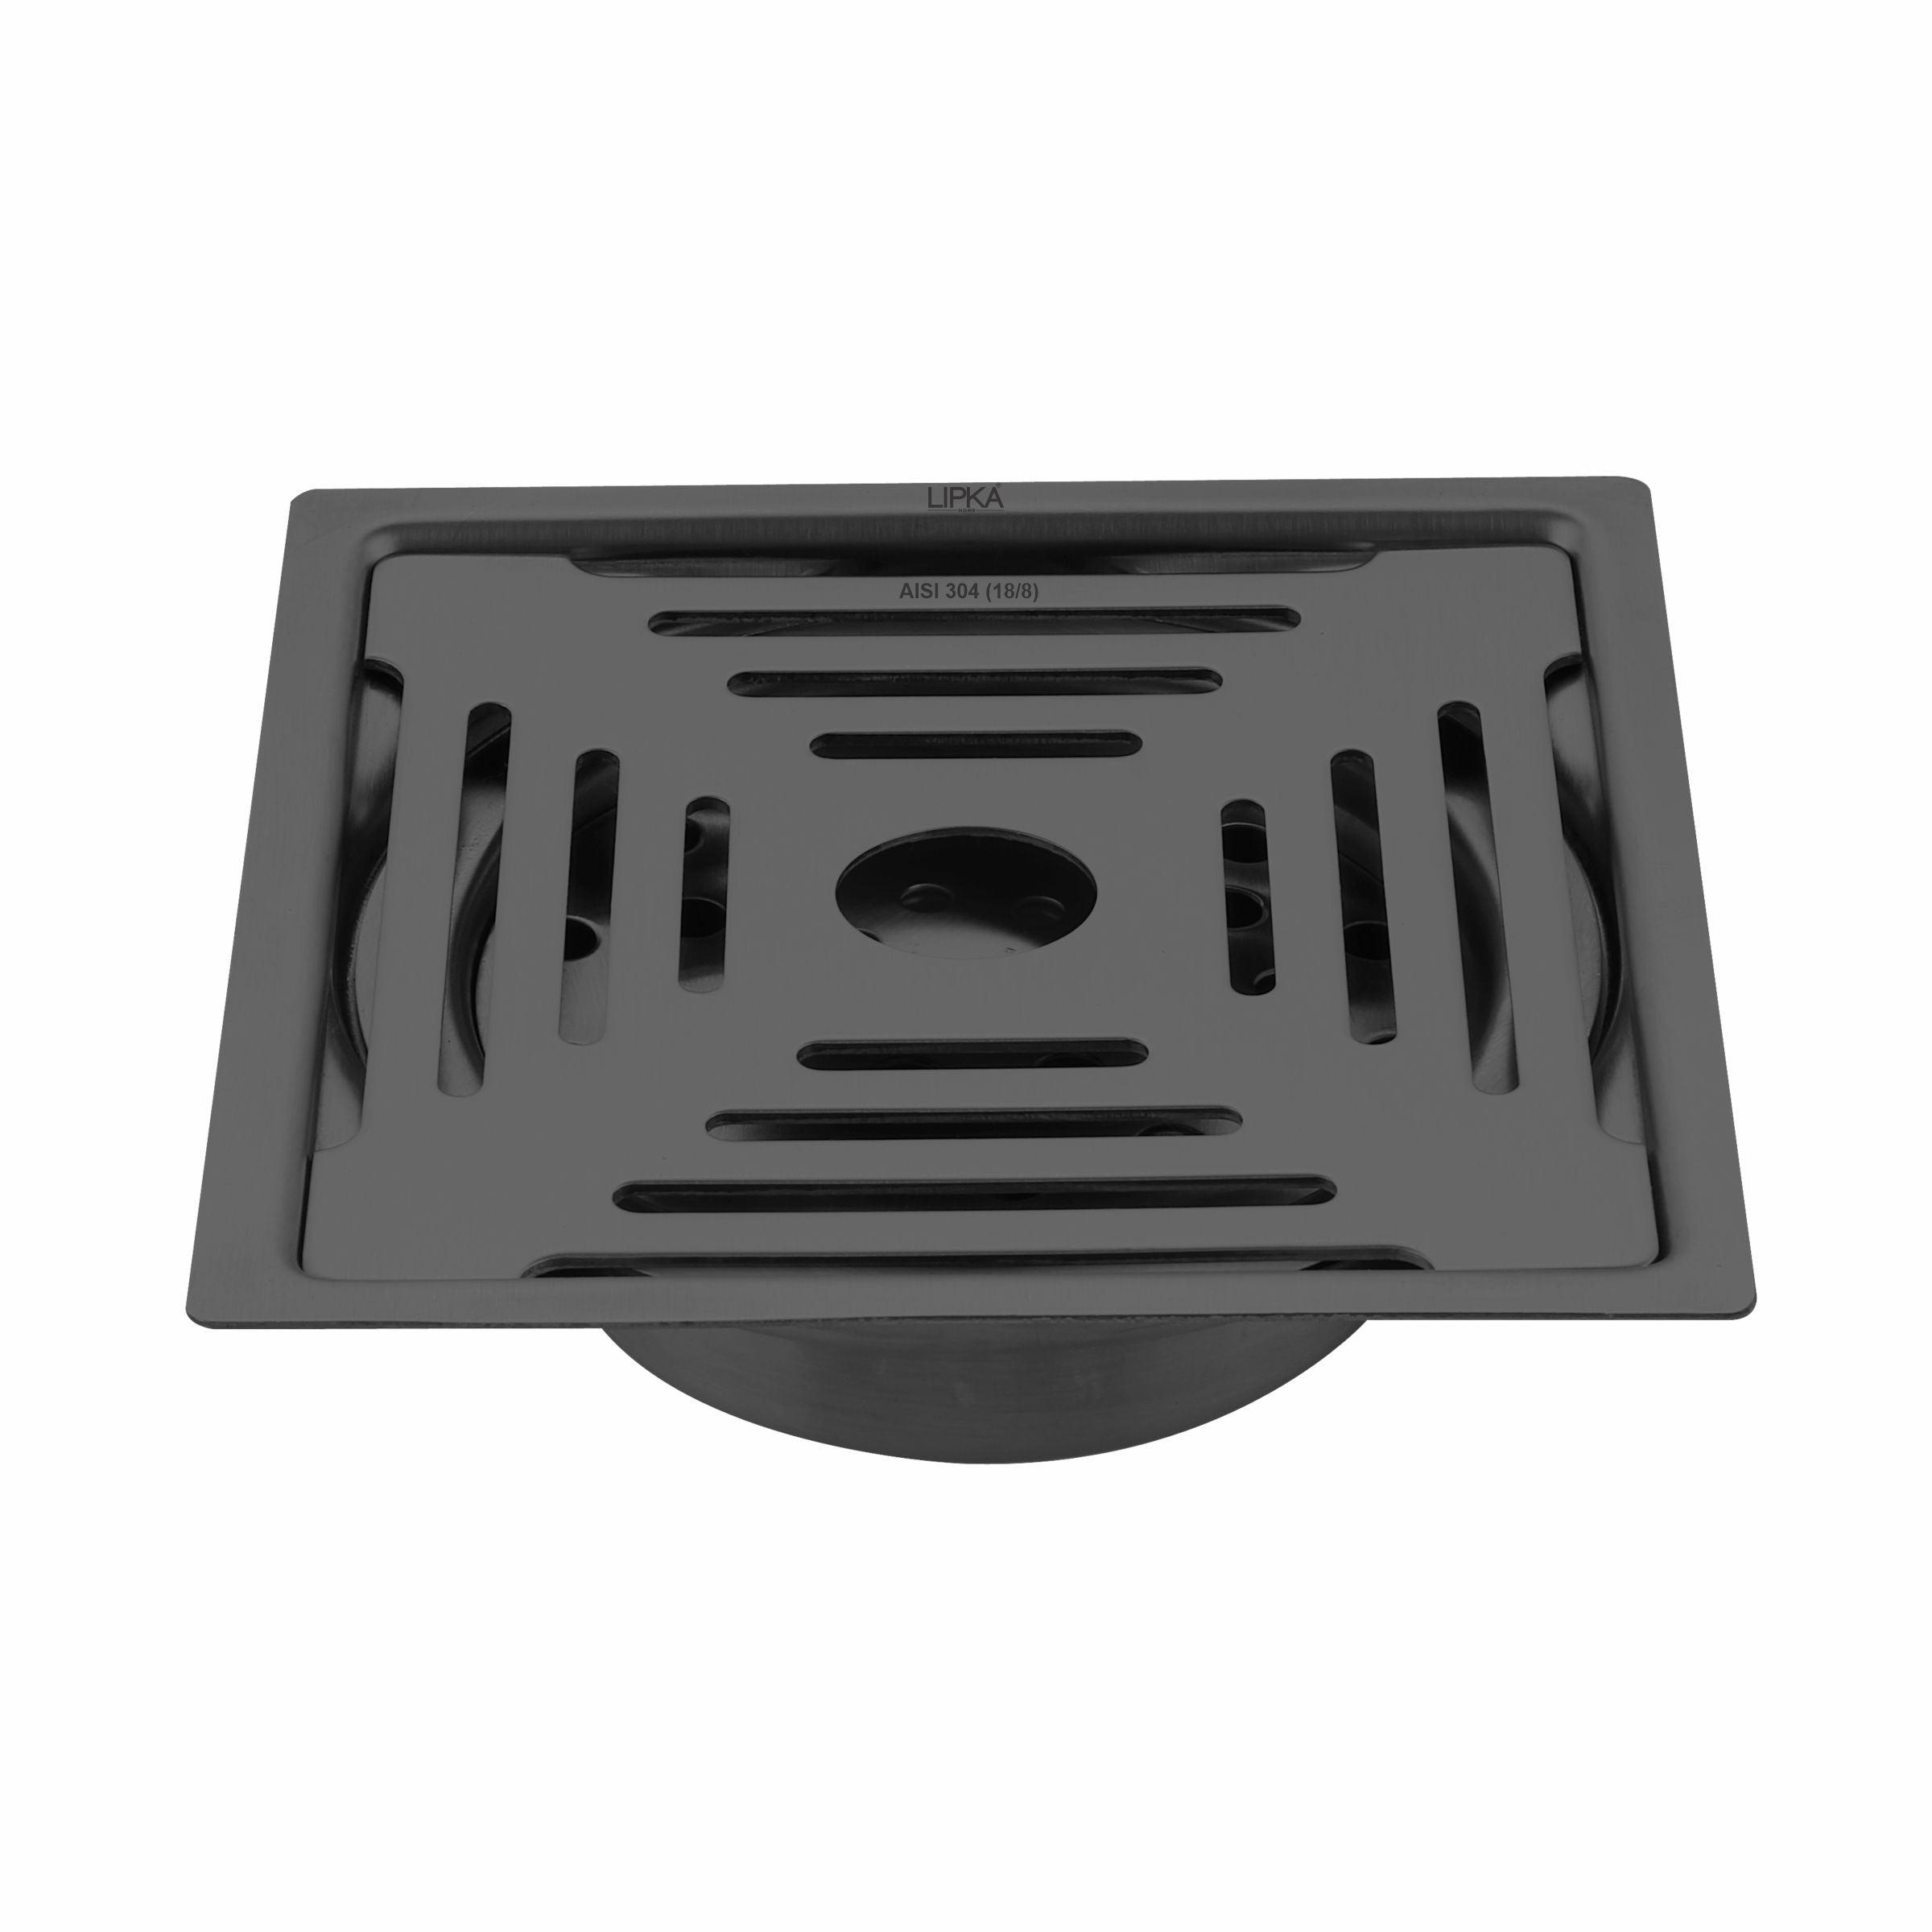 Green Exclusive Square Flat Cut Floor Drain in Black PVD Coating (6 x 6 Inches) with Hole & Cockroach Trap